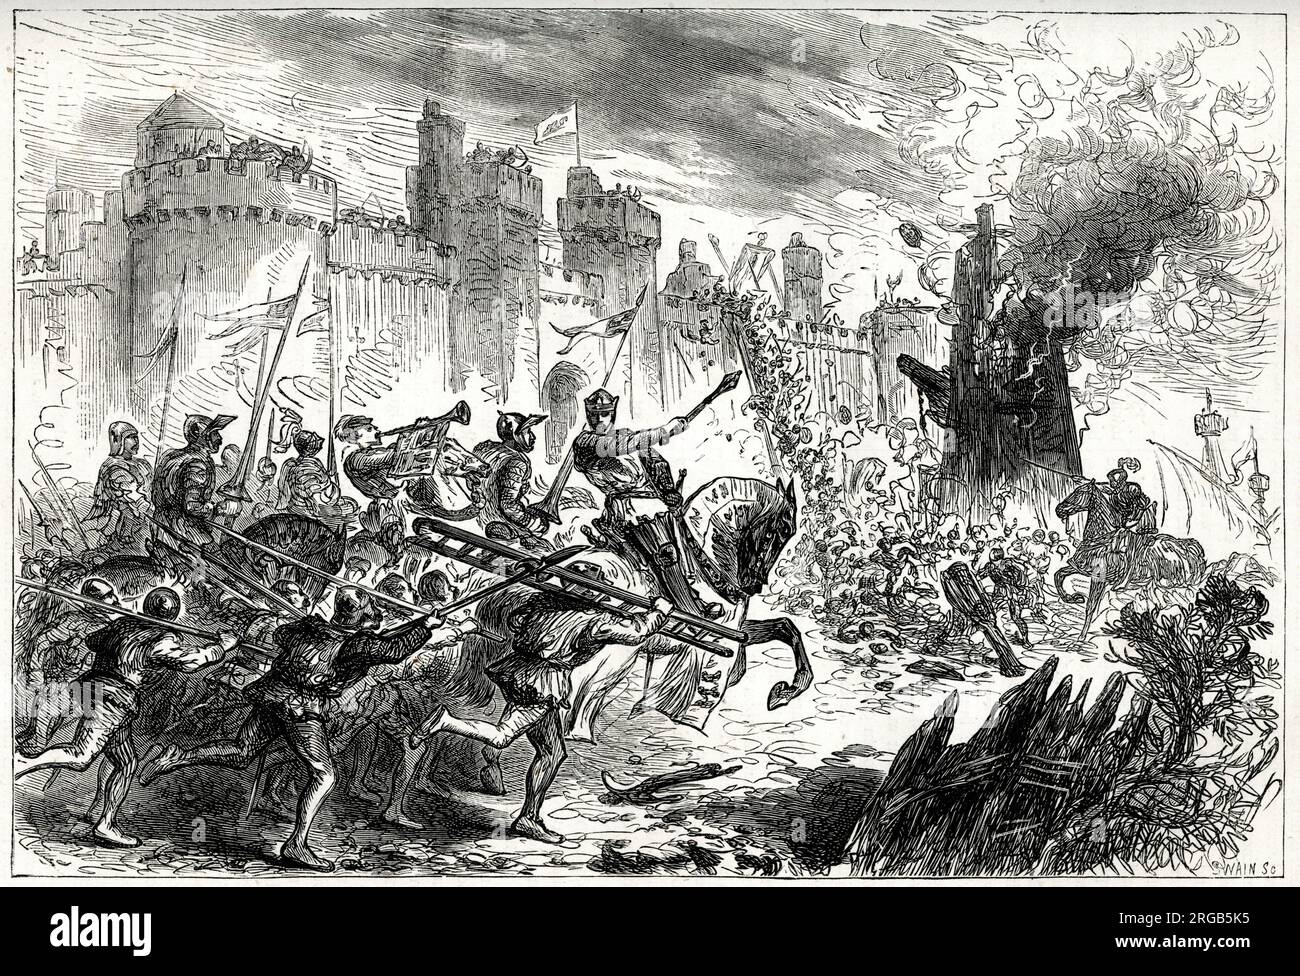 King Edward I in action during the Siege of Berwick, during the First War of Scottish Independence. Stock Photo